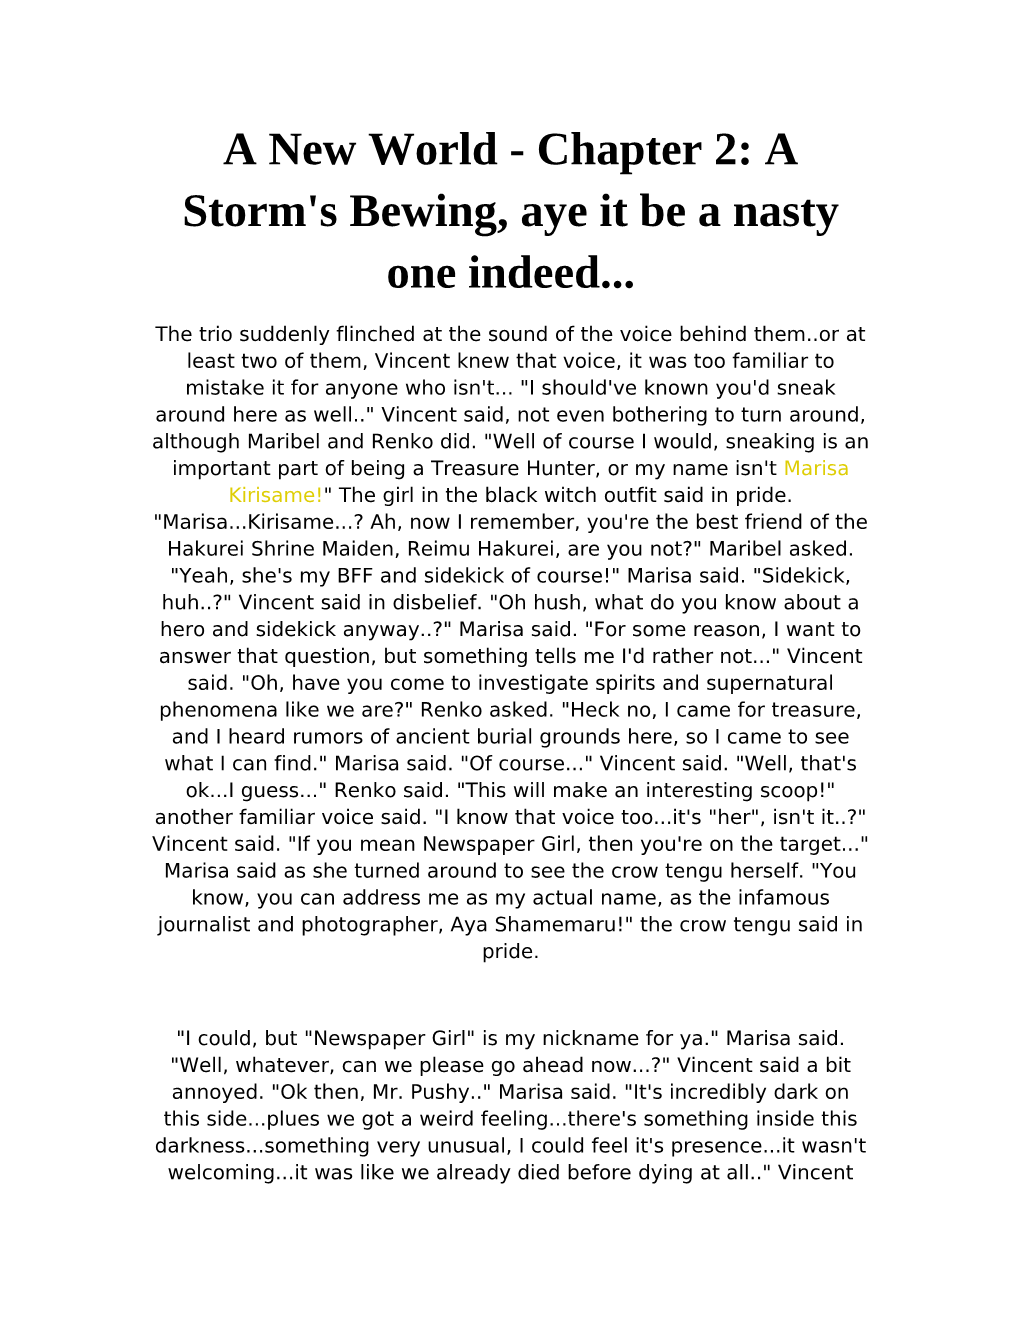 A New World - Chapter 2: a Storm's Bewing, Aye It Be a Nasty One Indeed